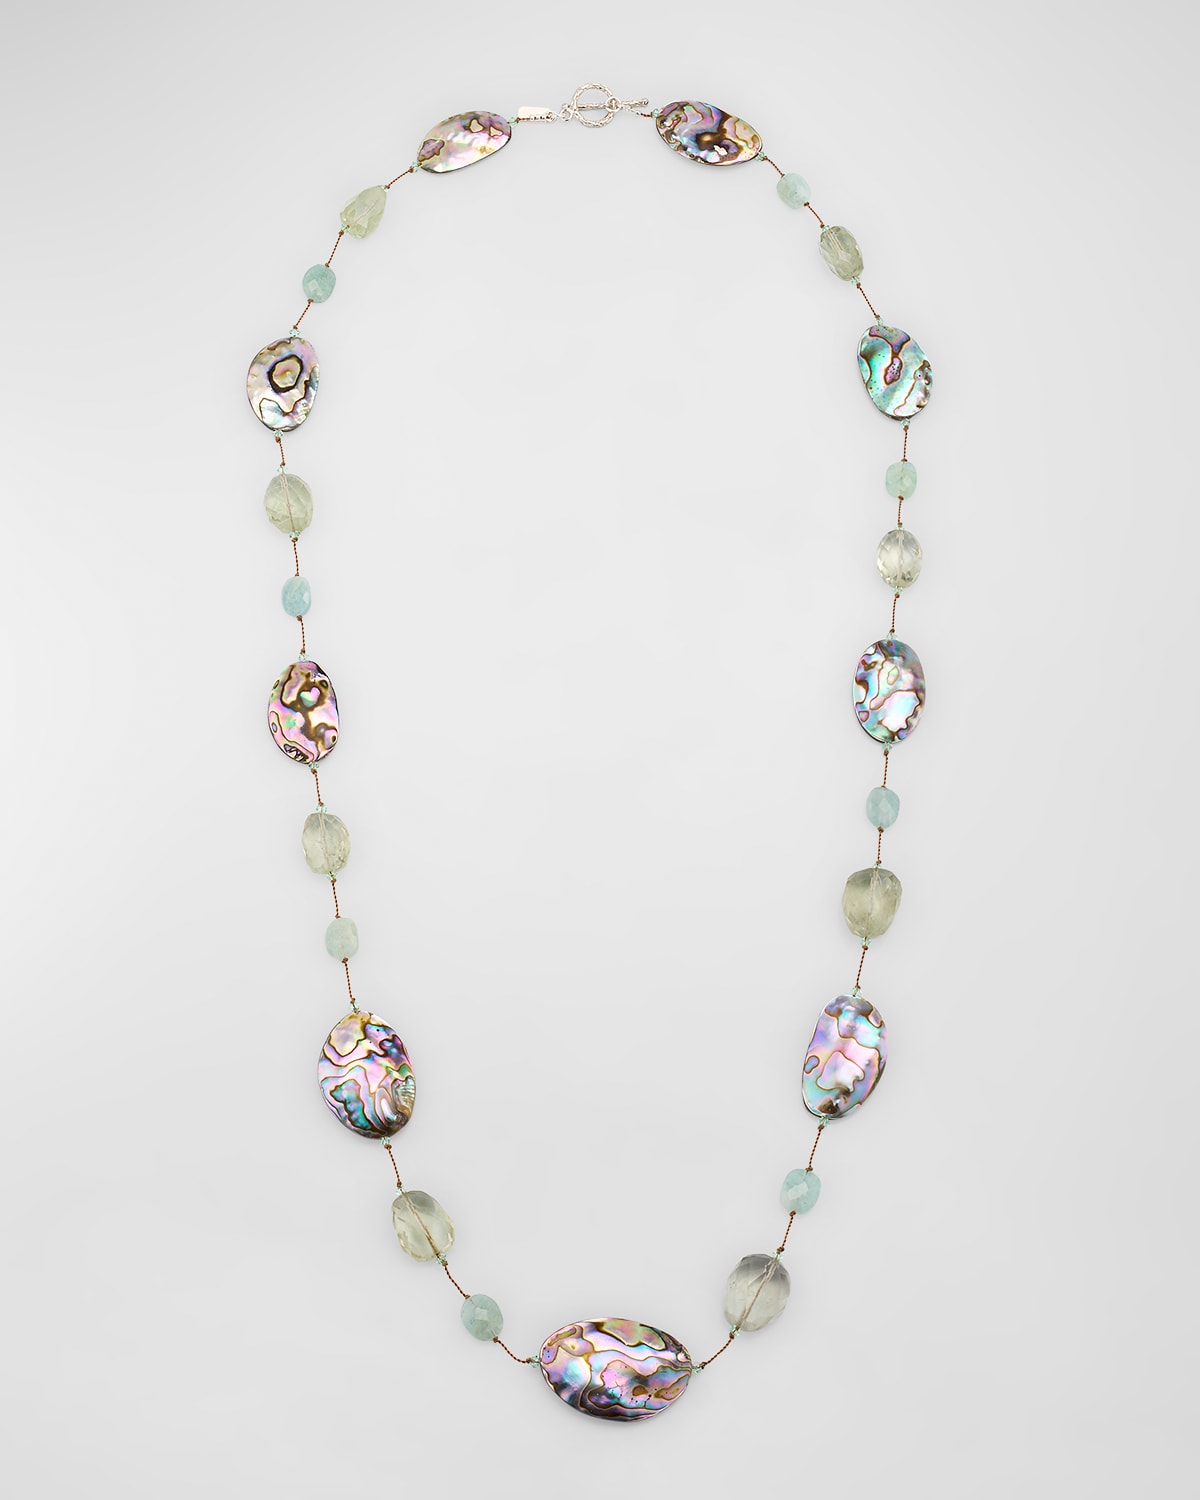 Limited Edition Abalone, Green Amethyst and Aquamarine Necklace in Sterling Silver, 35"L